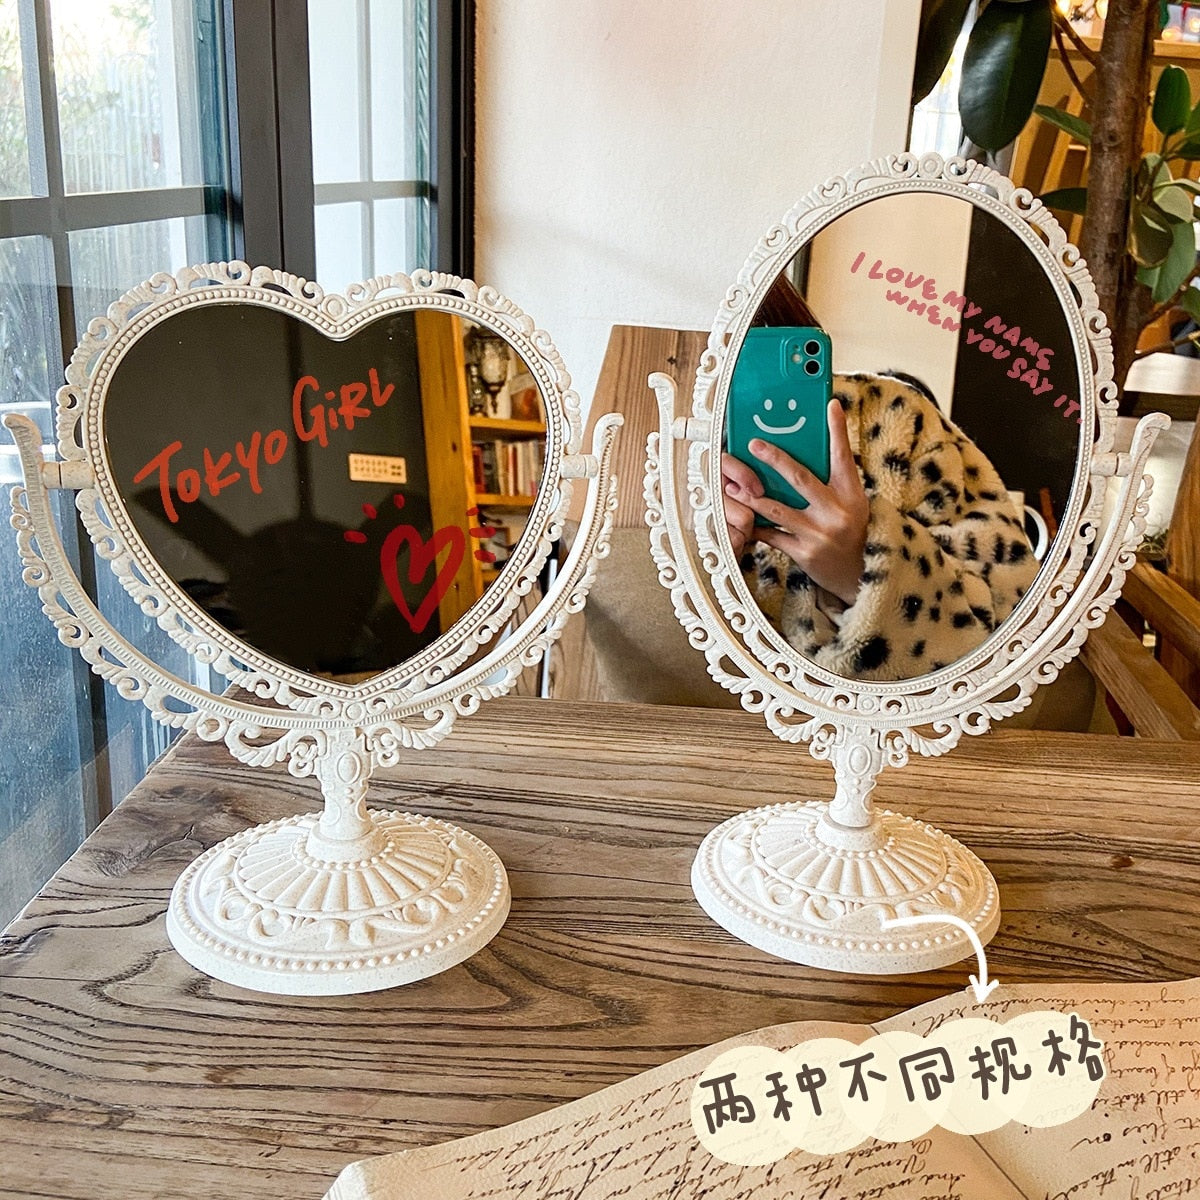 Heart Shaped Oval 360 Degree Rotating European Vintage Removable Hand Mirror